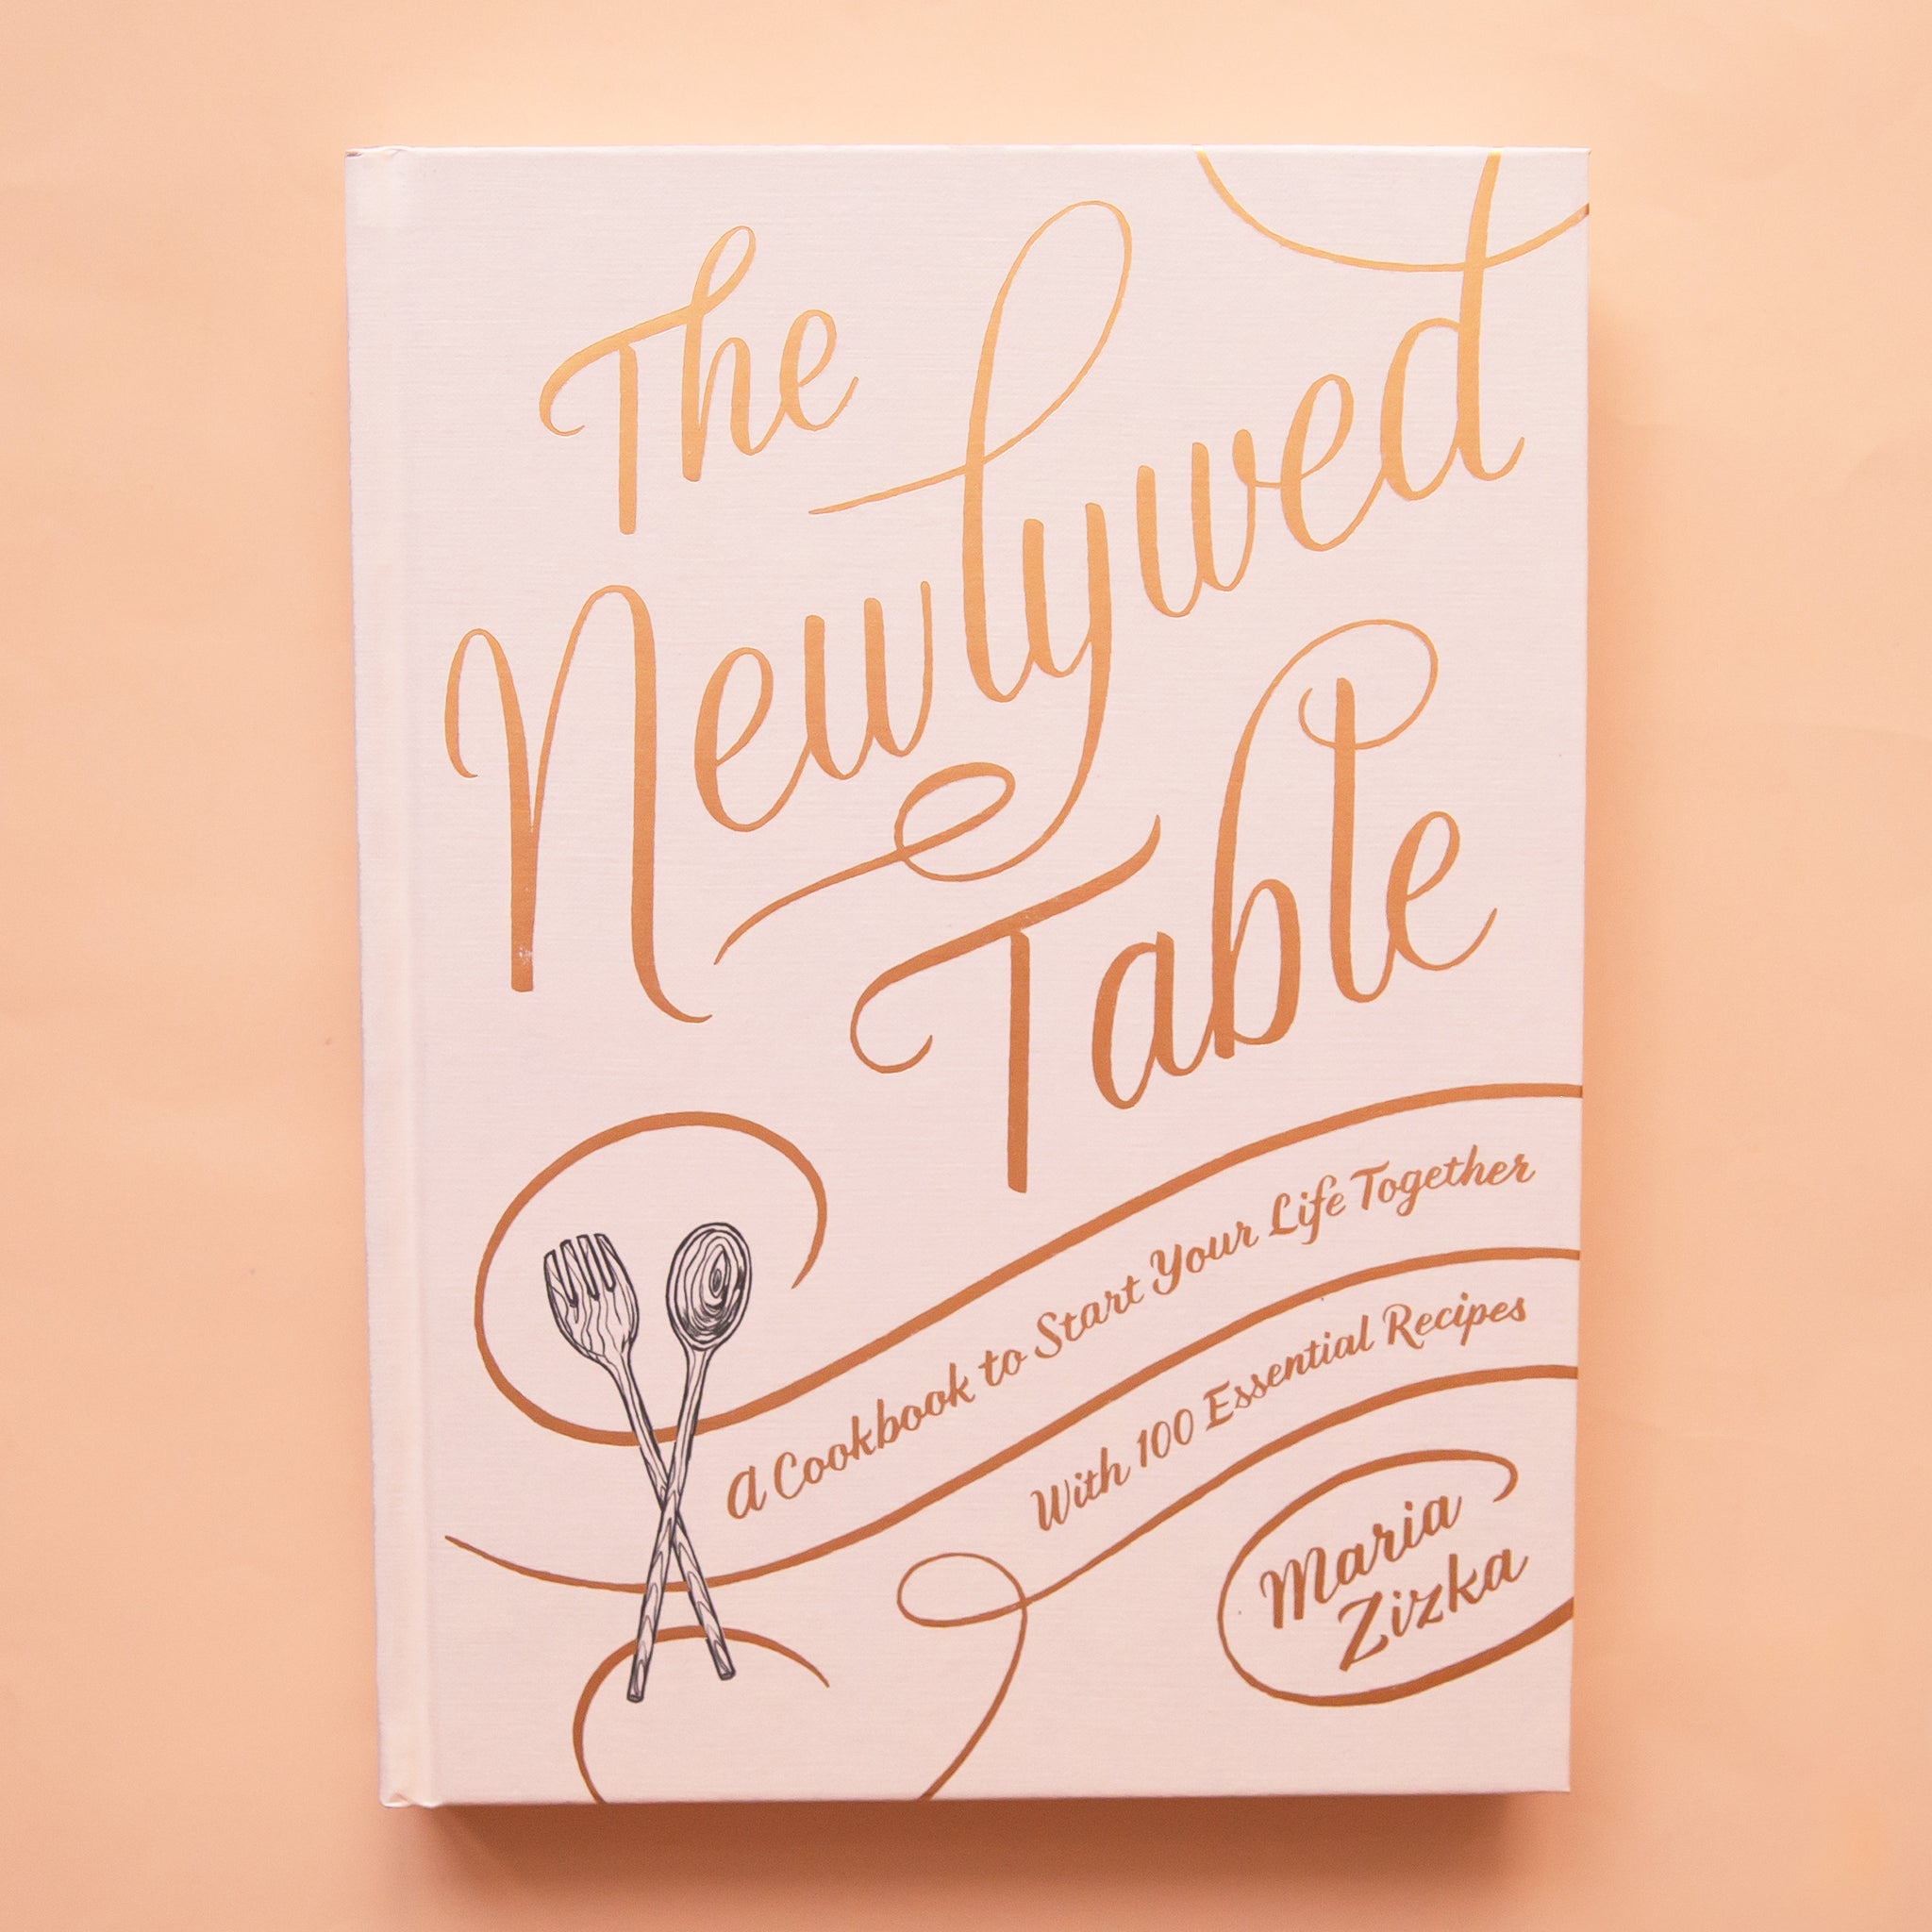 White hardcover book titled &#39;The newlywed table&#39; in gold foil cursive lettering. Below reads &#39;a cookbook to start your life together with 100 essential recipes&#39;. A black and white wooden spork and spoon sits in the bottom left corner.